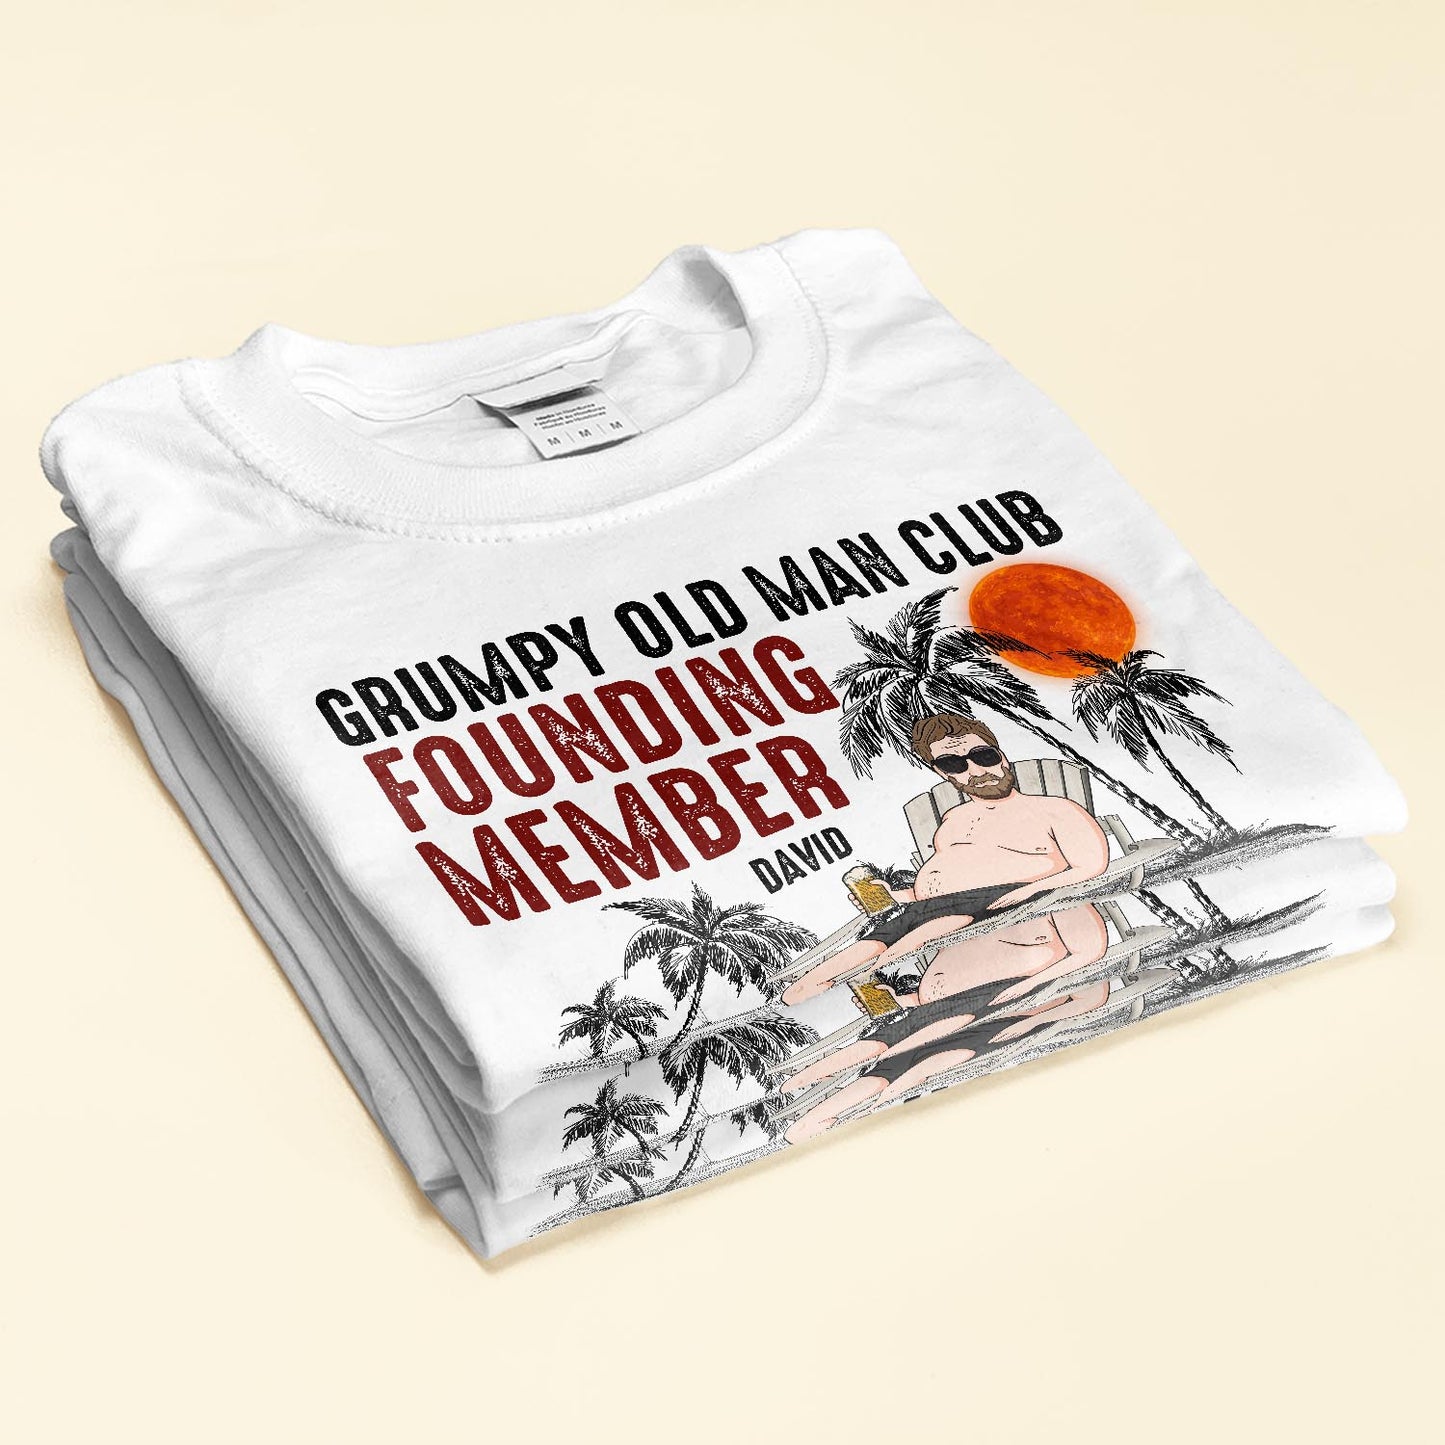 Grumpy Old Man Club - Personalized Shirt - Birthday, Funny, Father's Day Gift For Husband, Dad, Father, Papa